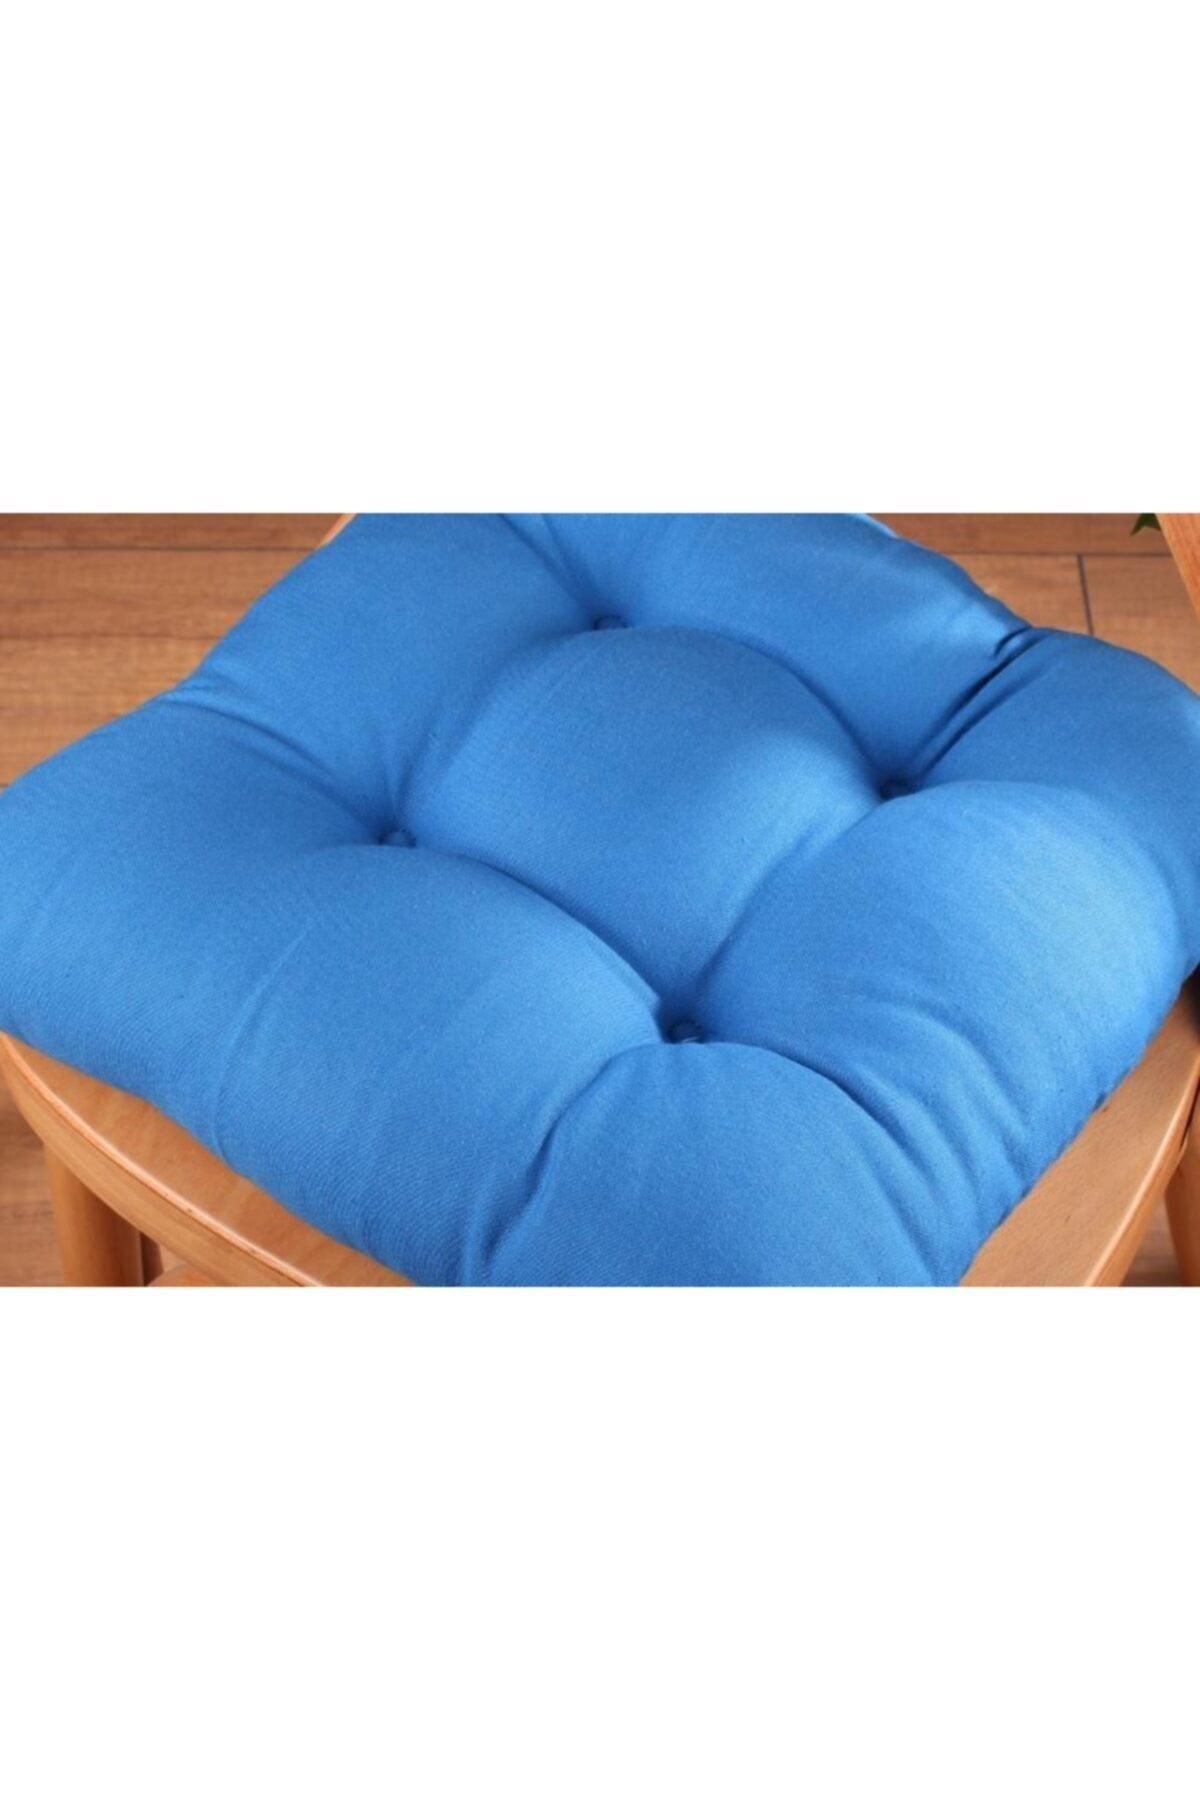 Lux Pofidik Blue Chair Cushion Special Stitched Laced 40x40cm - Swordslife